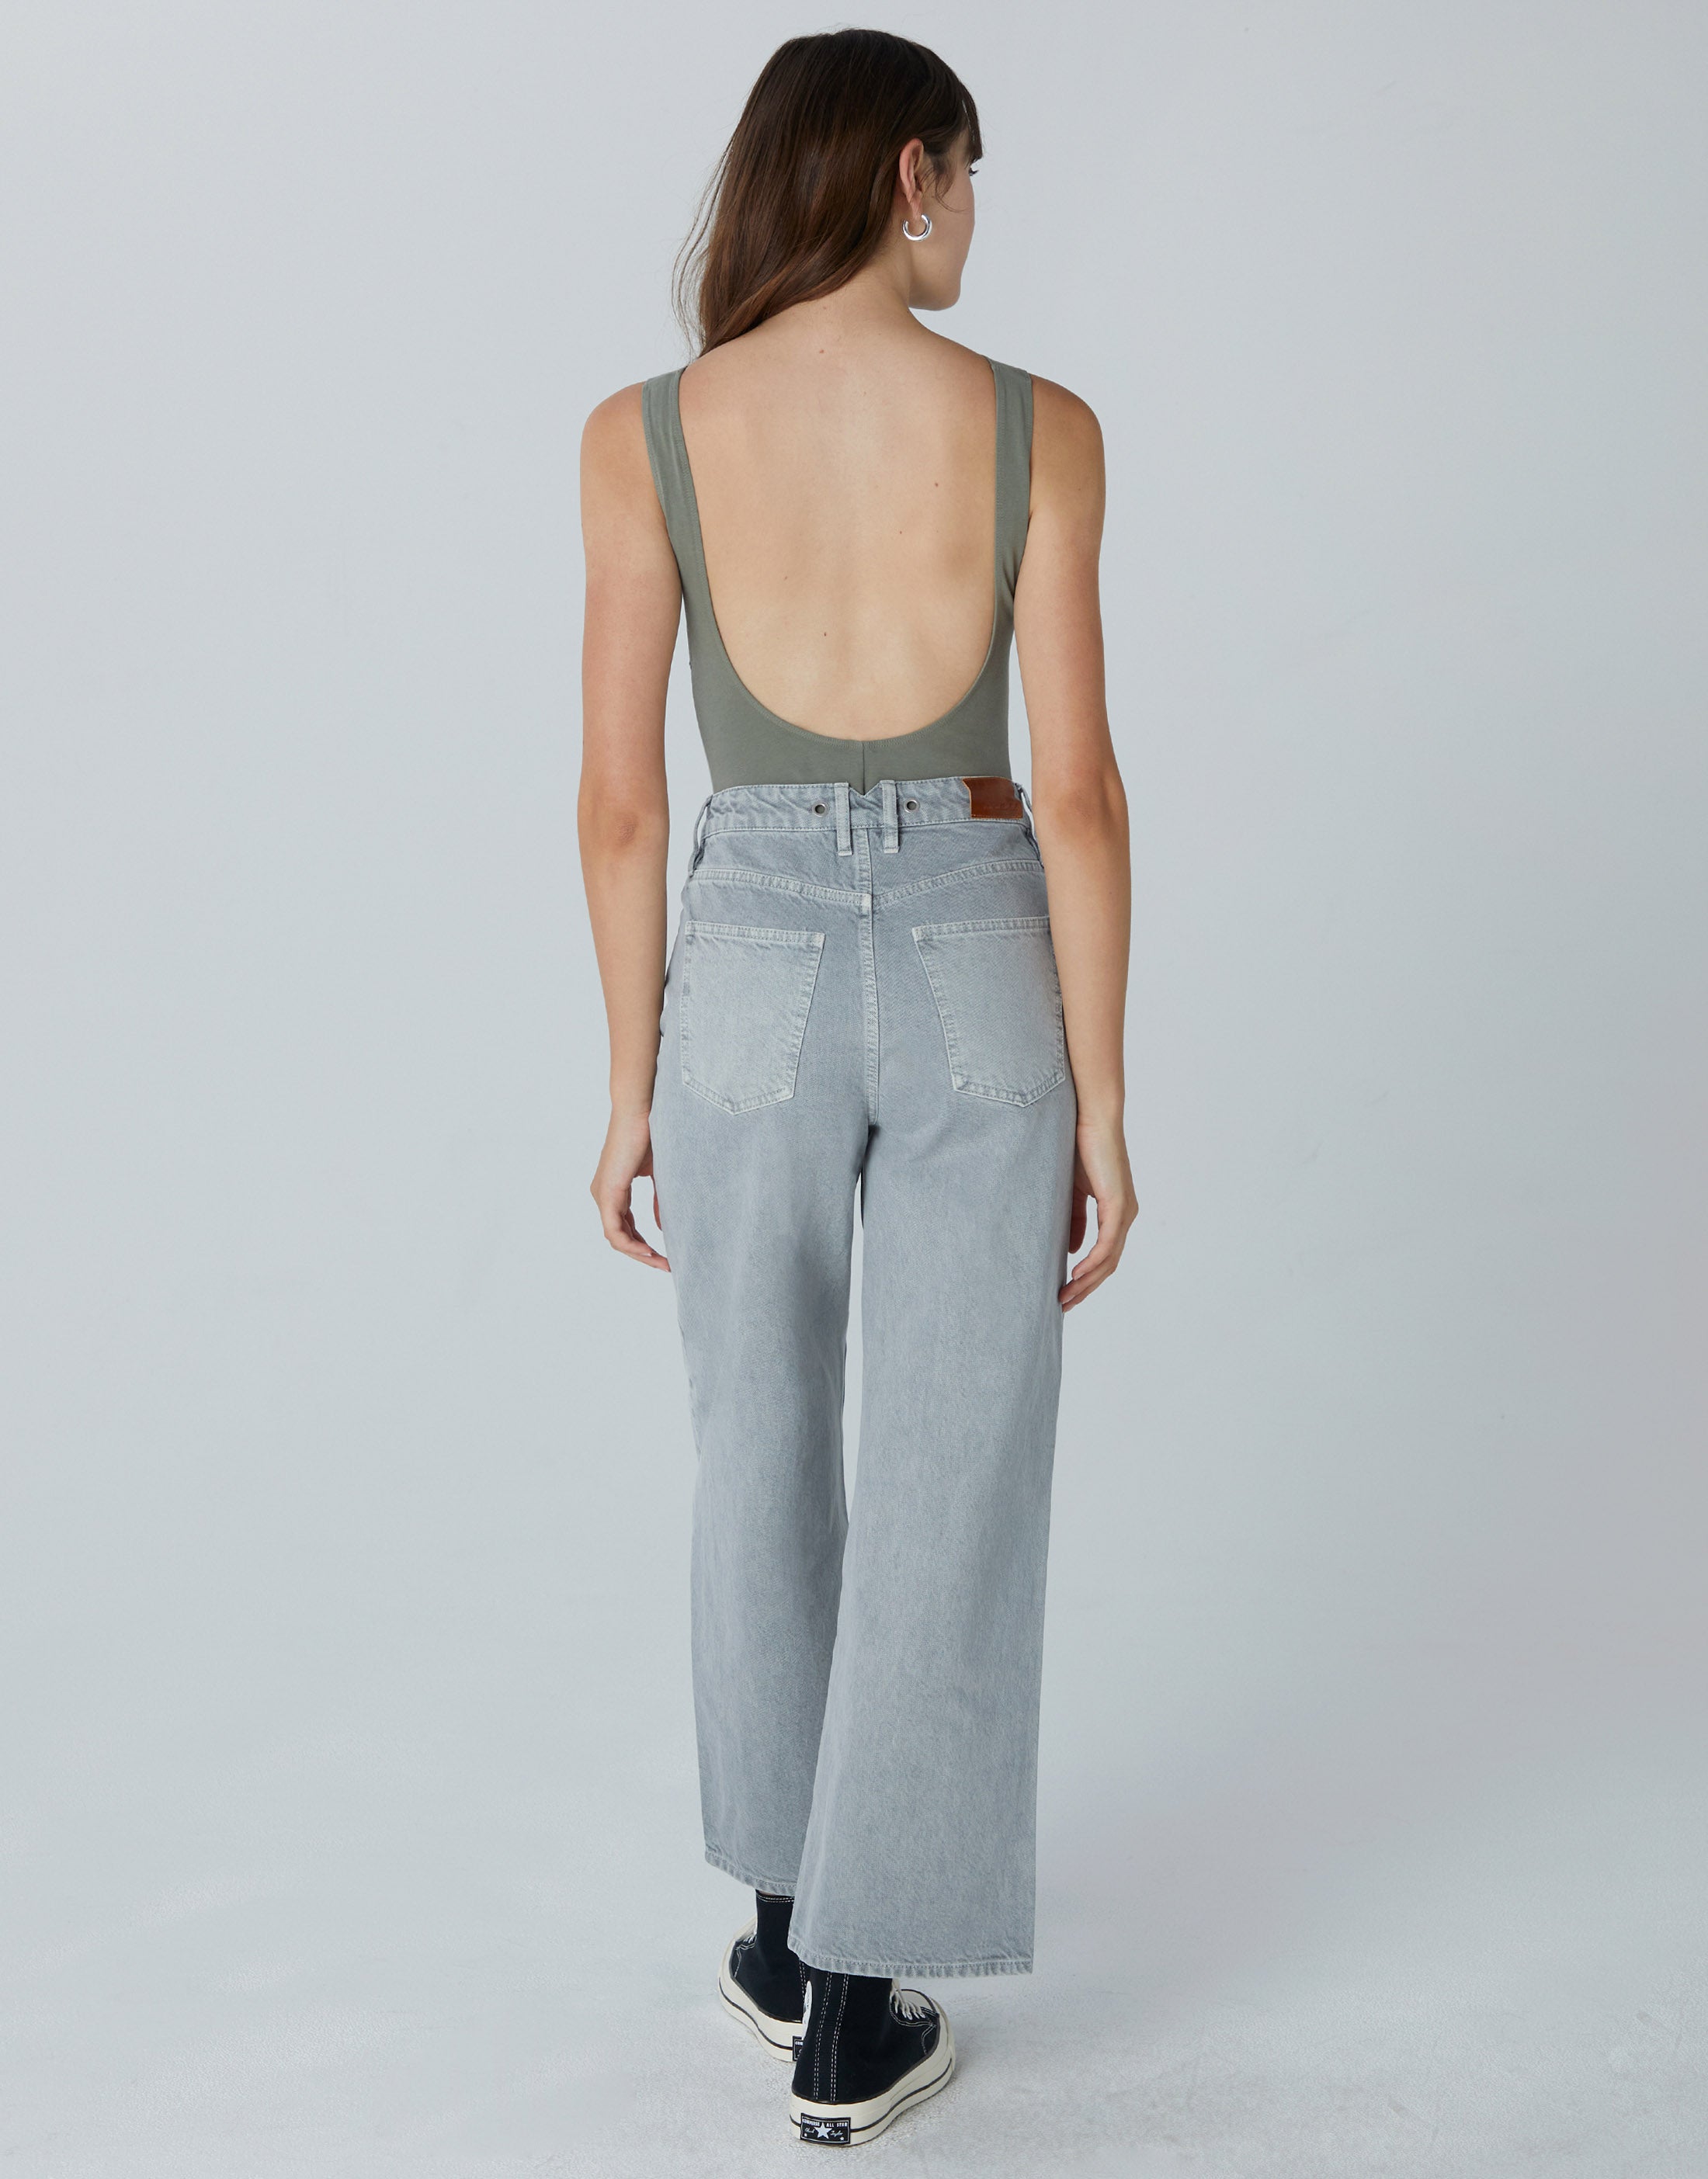 NOEMI HIgh Rise Wide Leg Crop in Dove – Unpublished Collection